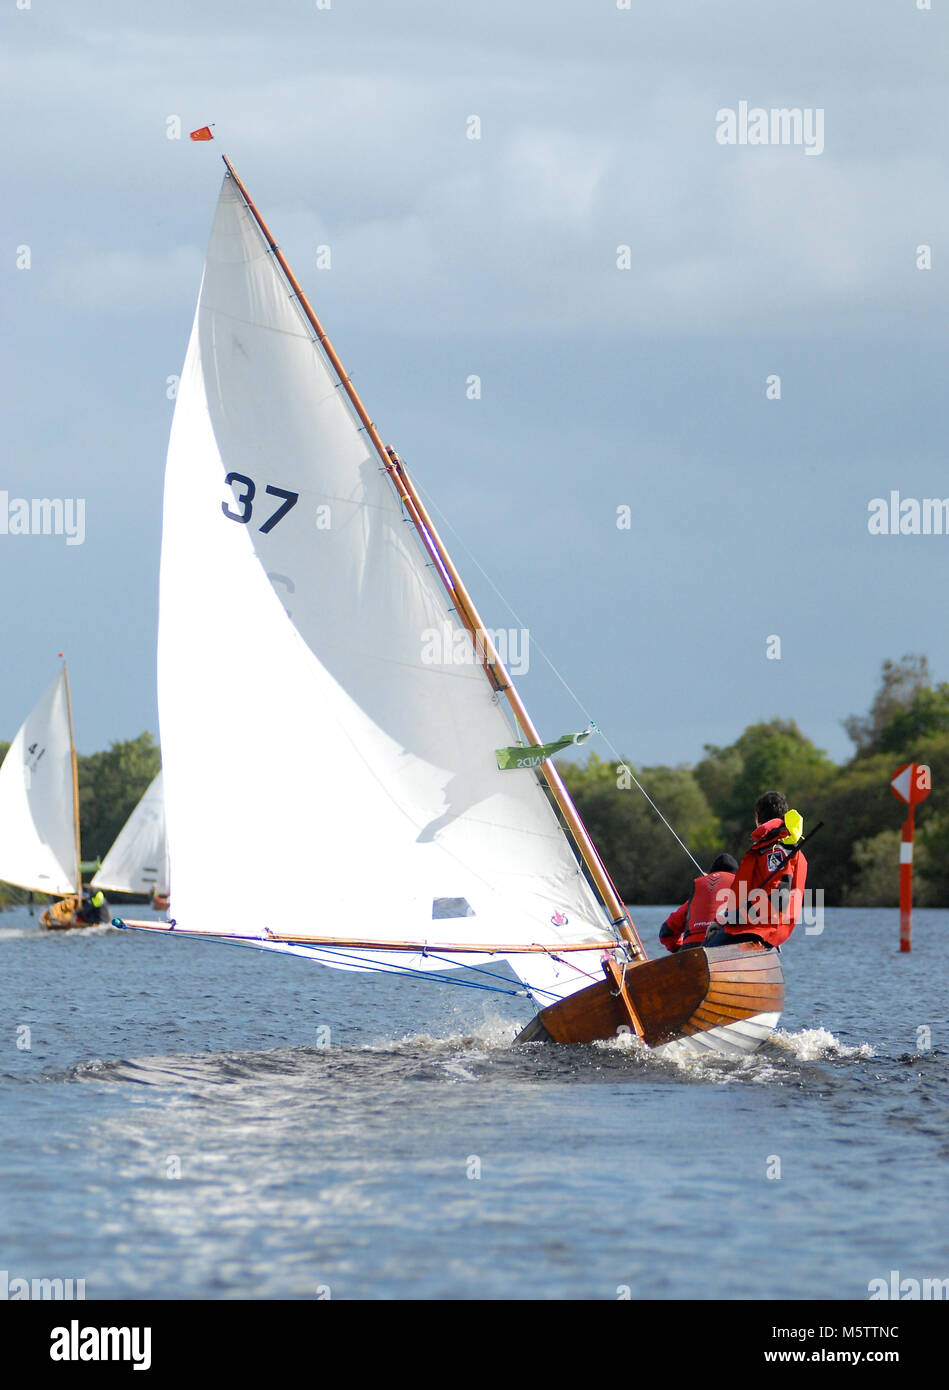 A Water Wag dinghy racing down the Shannon River towards Tarmonbarry in Ireland. (French sailors Sylvie Viant & Martine Gahinet-Charrier on board) Stock Photo